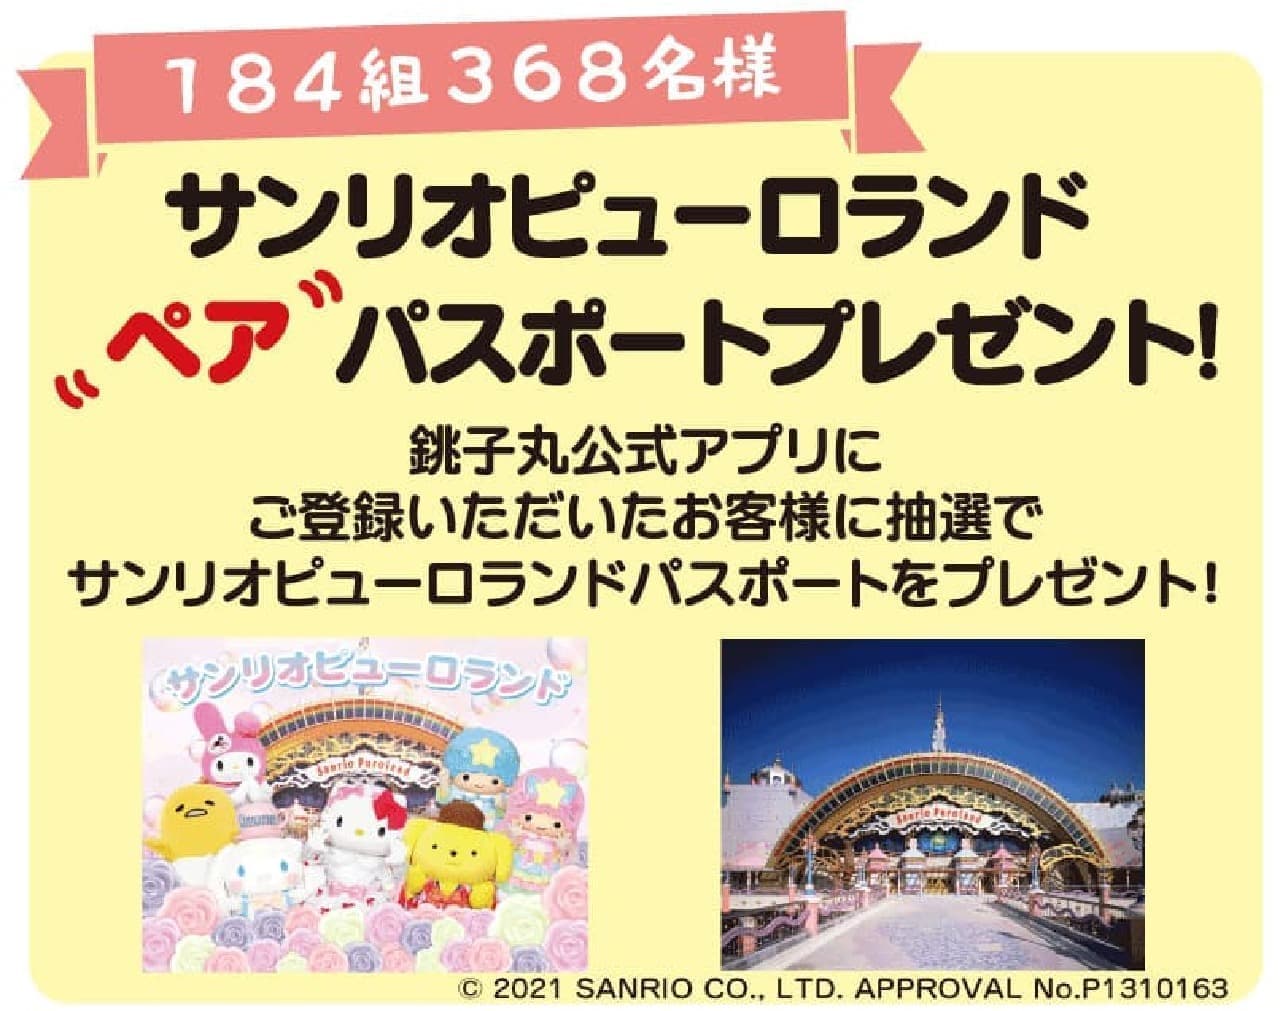 "45th ANNIVERSARY Founding Festival", a collaboration between Sushi Choushimaru and "Pompompurin"